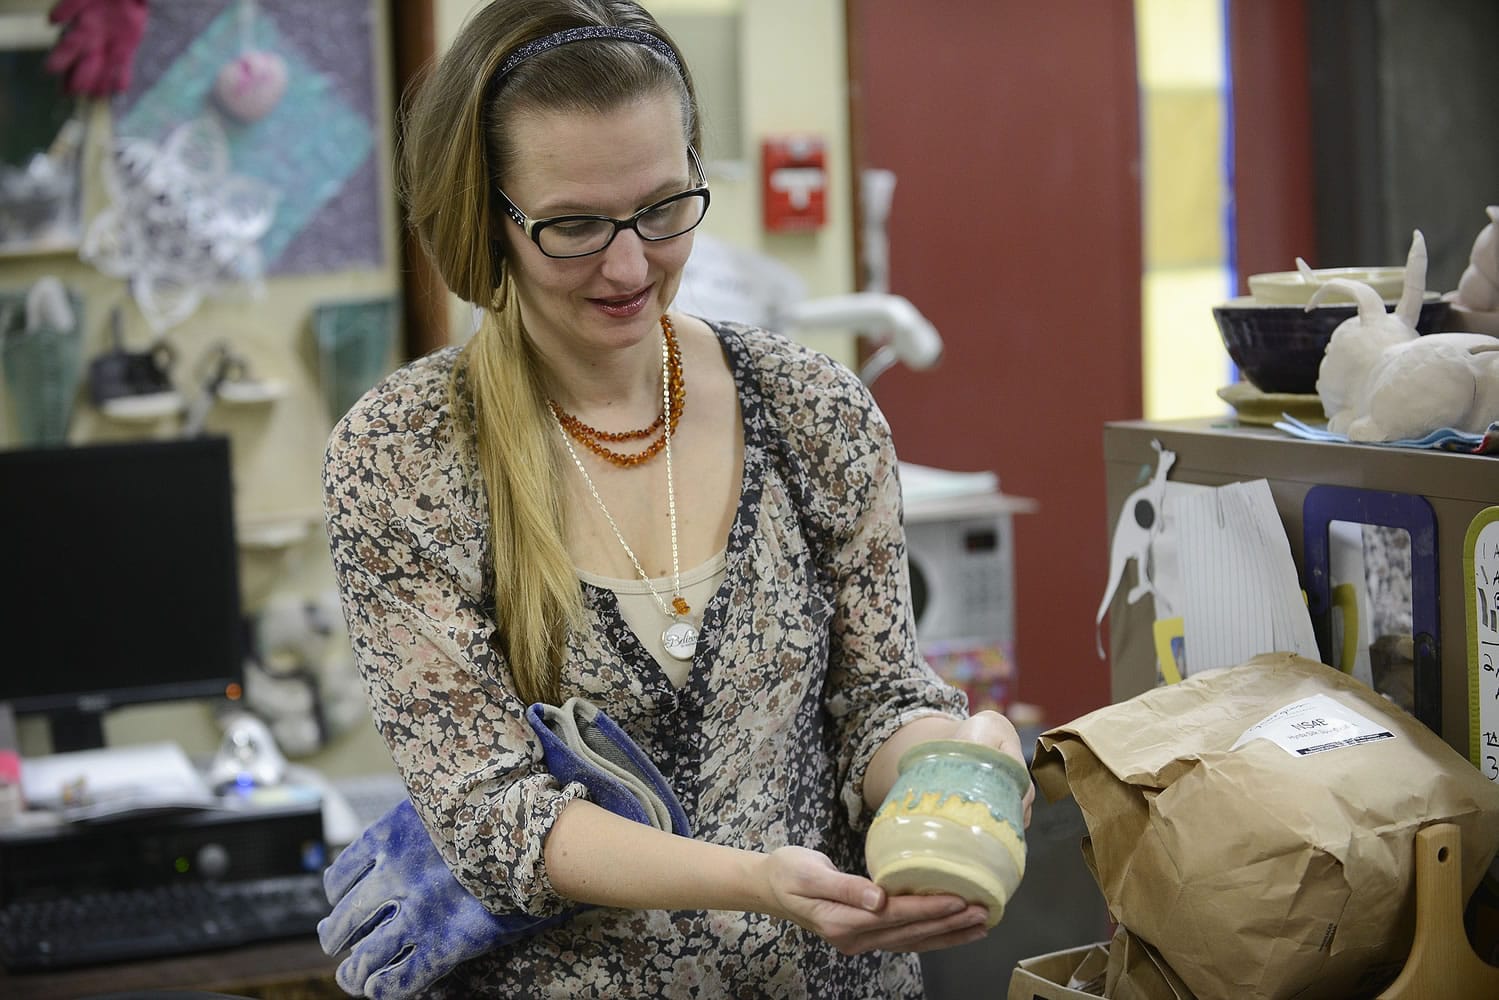 Ariane Kunze/The Columbian
Art teacher Kristie Vinyard sorts student pottery during class Wednesday at Prairie High School. Several of her students donated pieces to be auctioned at a fundraiser for Vinyard later this month.